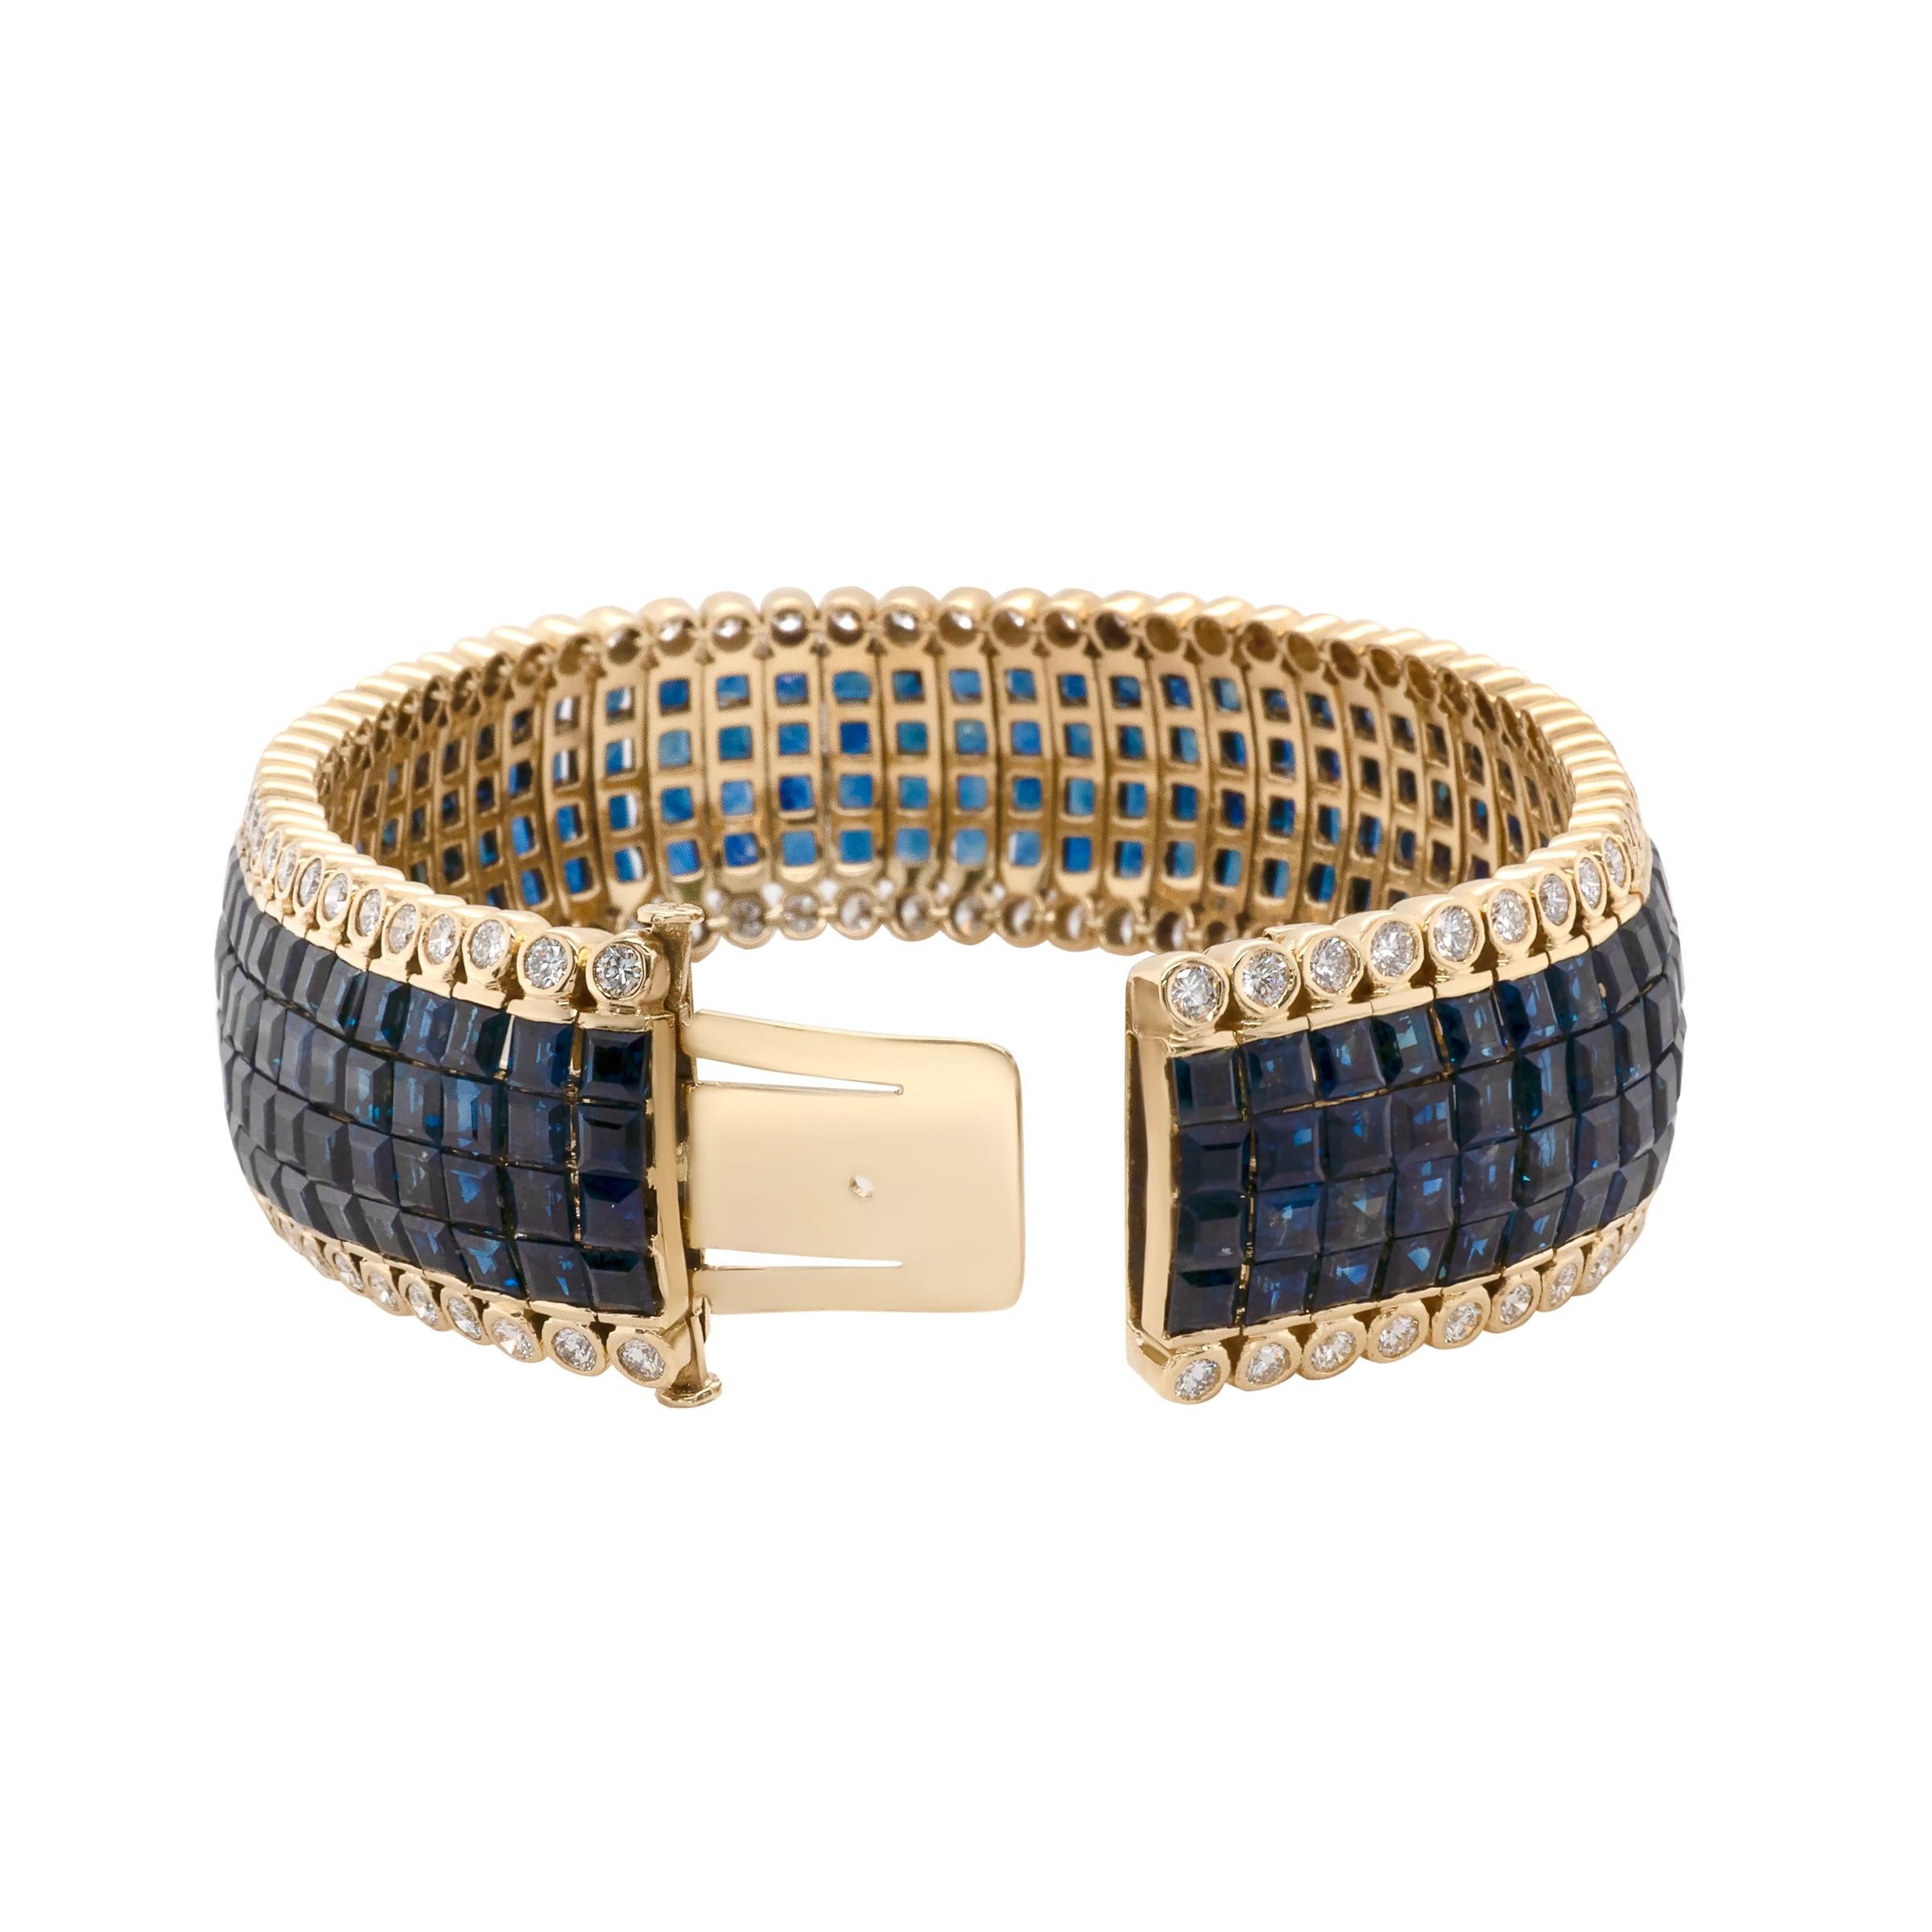 This invisible set blue sapphire bracelet is accented with round white diamonds along the sides. Set in 18k yellow gold, this piece boasts a total of 248 small square cut blue sapphires in four rows of invisible setting and 124 bezel set